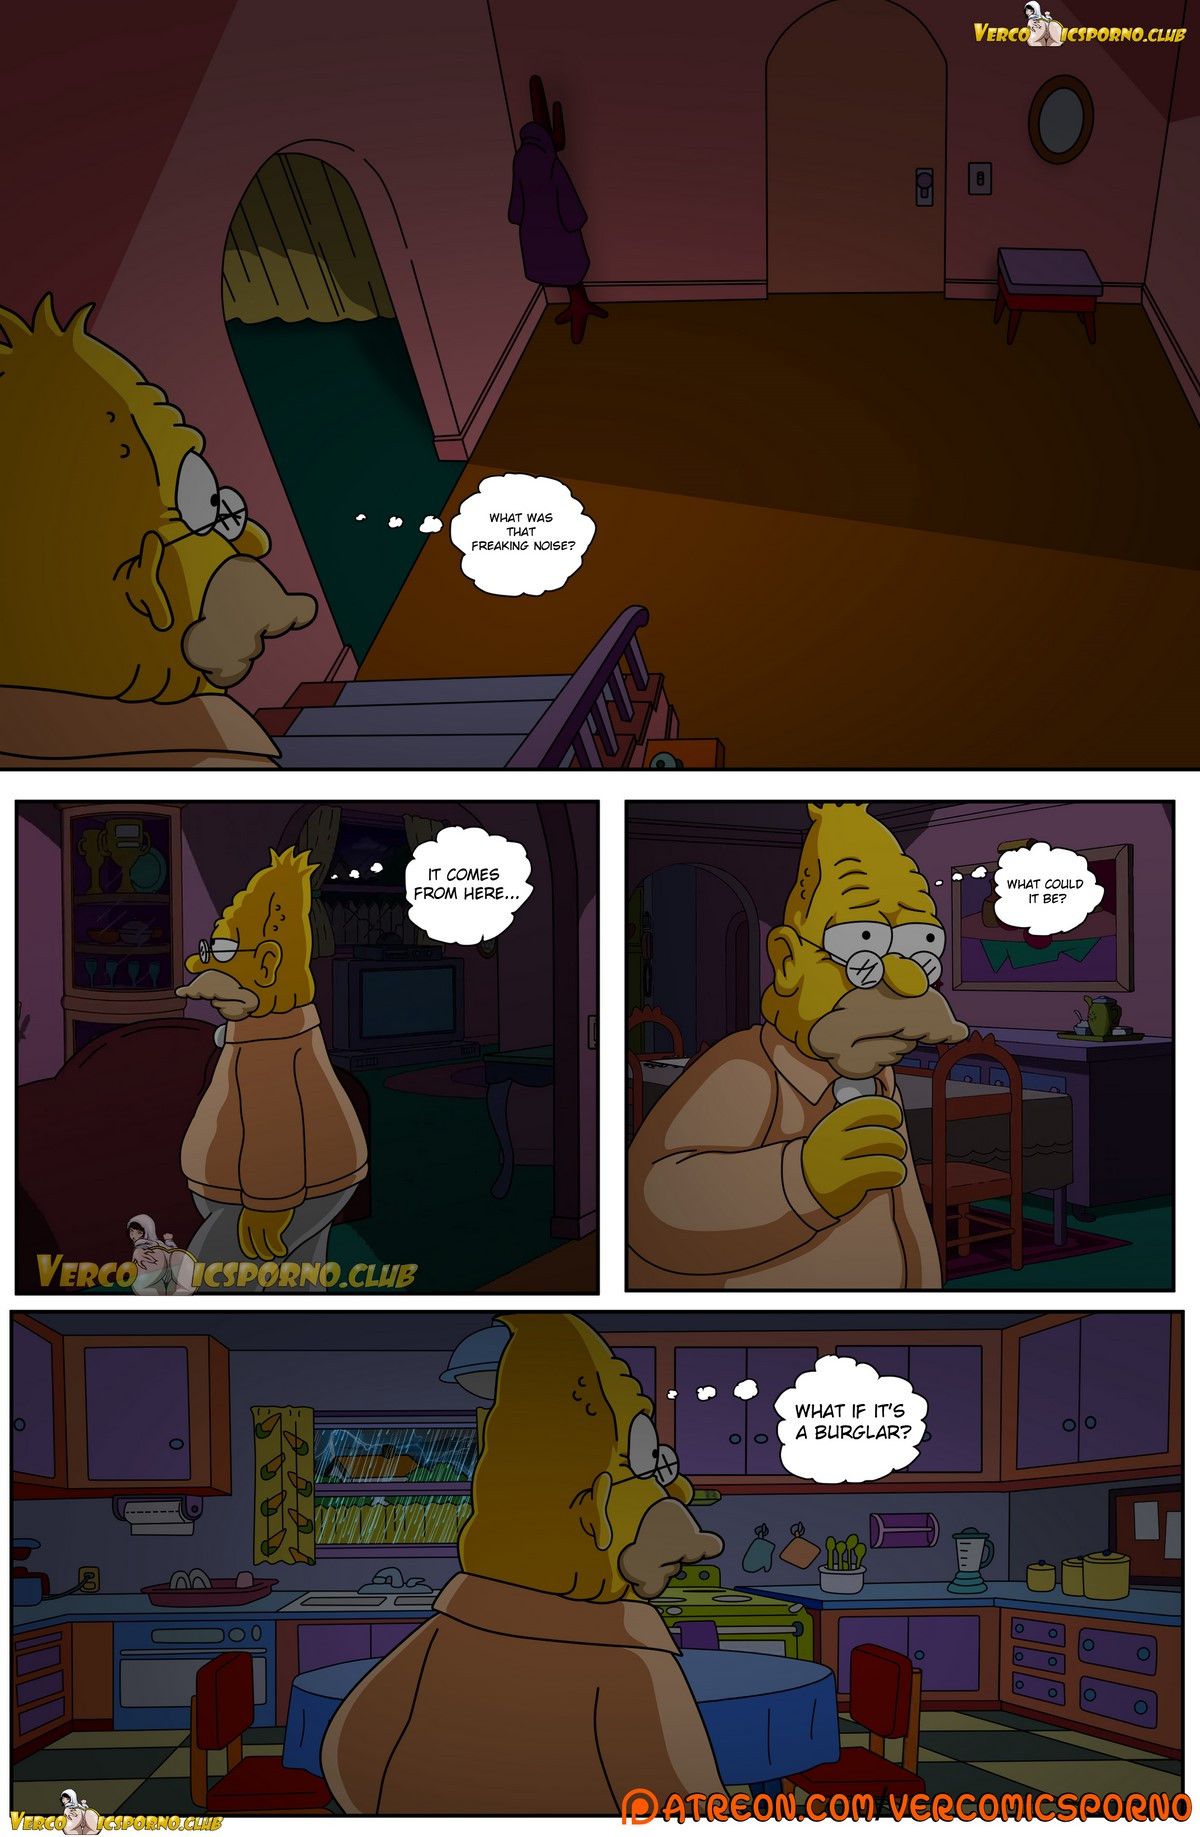 Grandpa and me - [Itooneaxxx] - [Drah Navlag] - [VCP] - [The Simpsons] 36